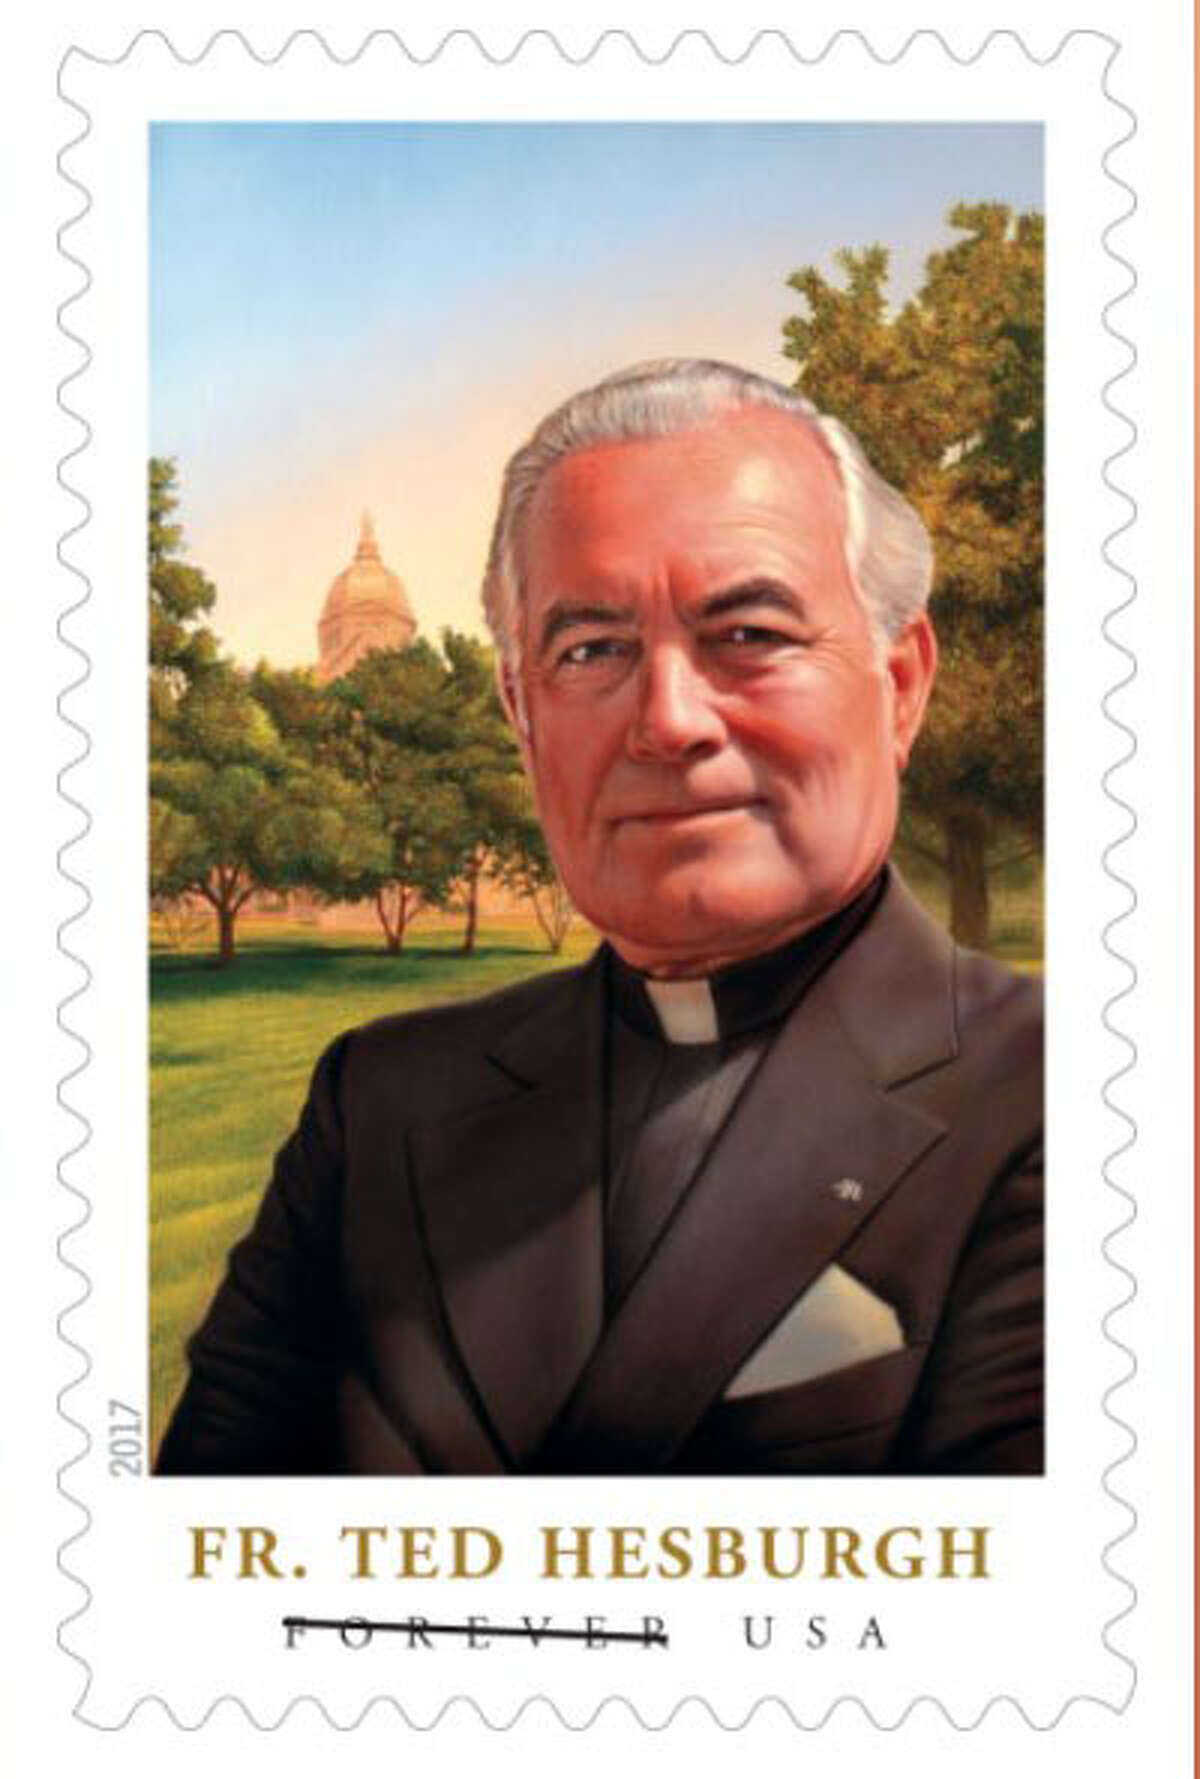 FatherÂ Theodore Hesburgh will be honored with a stamp in 2017.